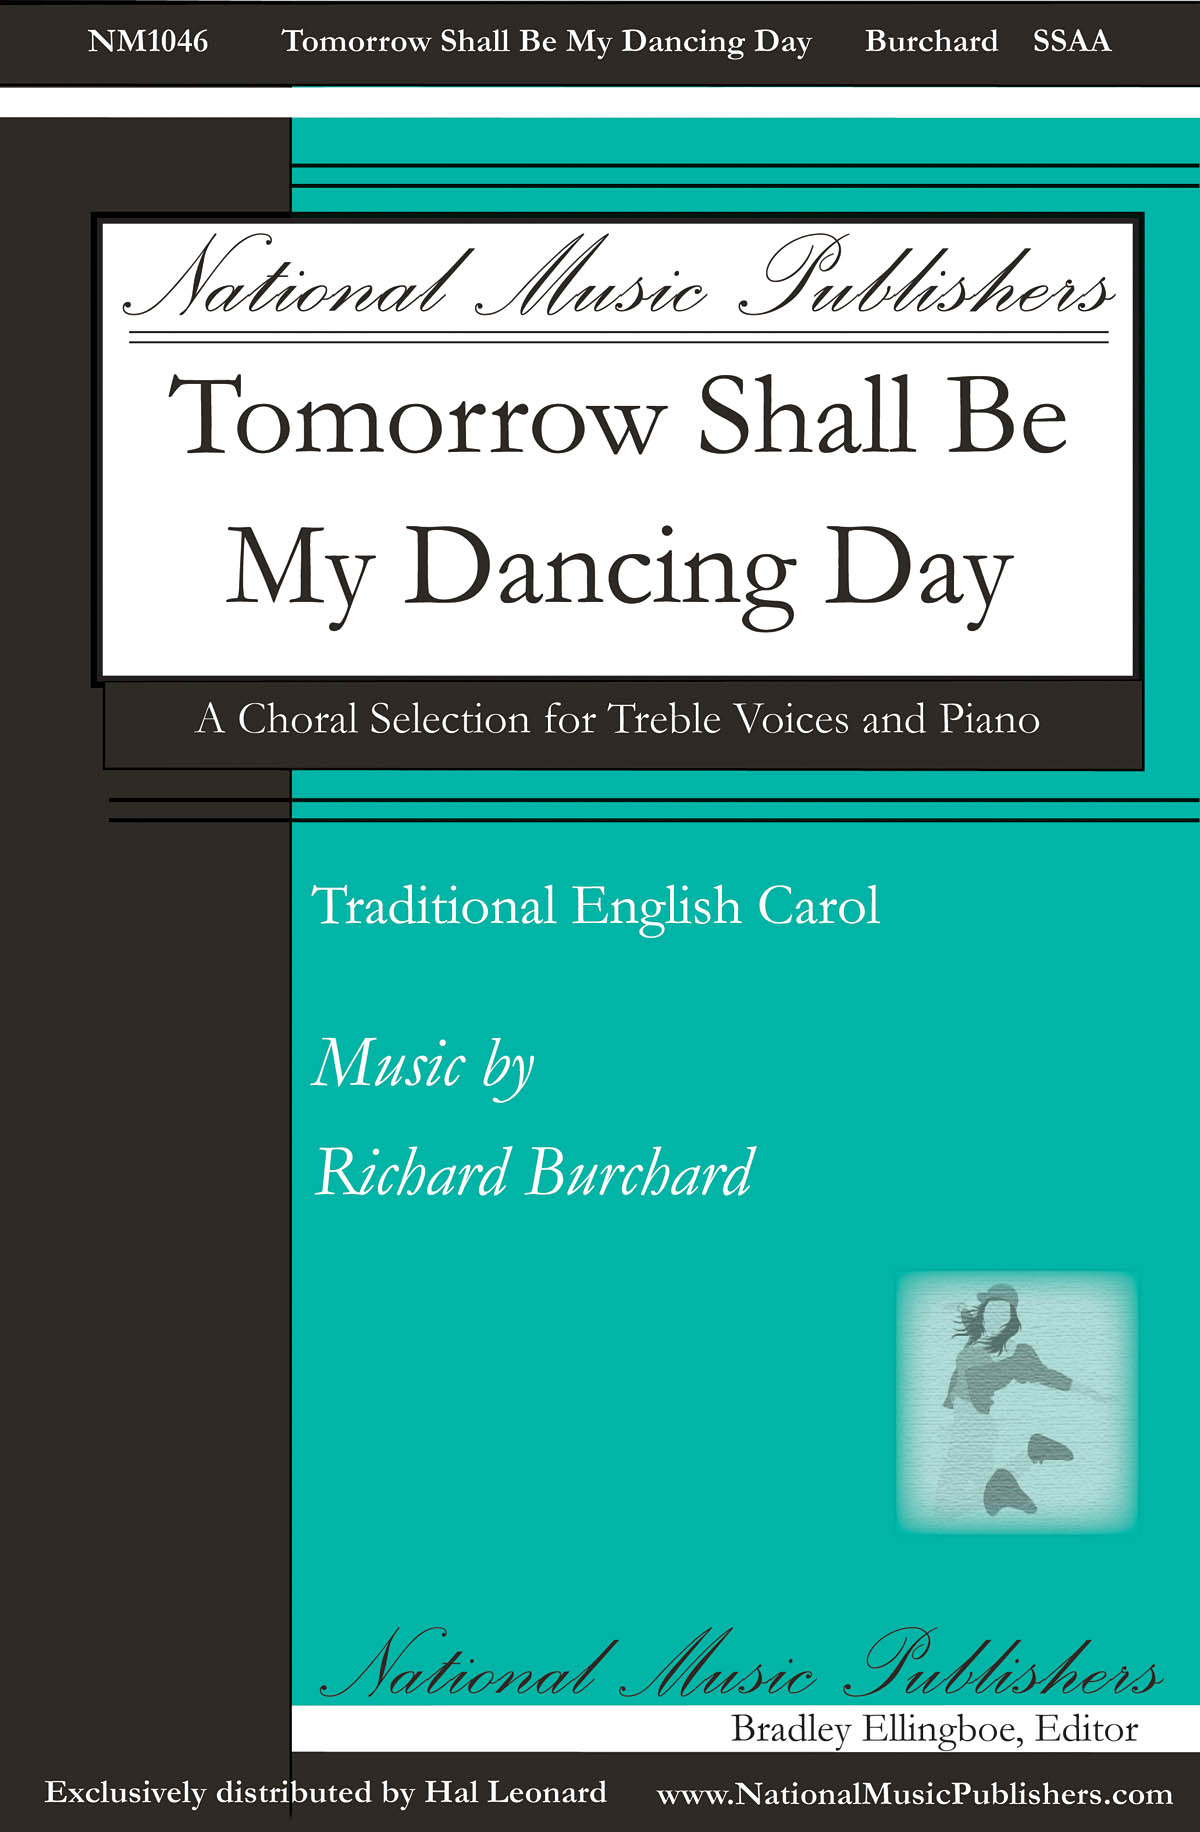 Richard Burchard: Tomorrow Shall Be My Dancing Day: Upper Voices a Cappella: